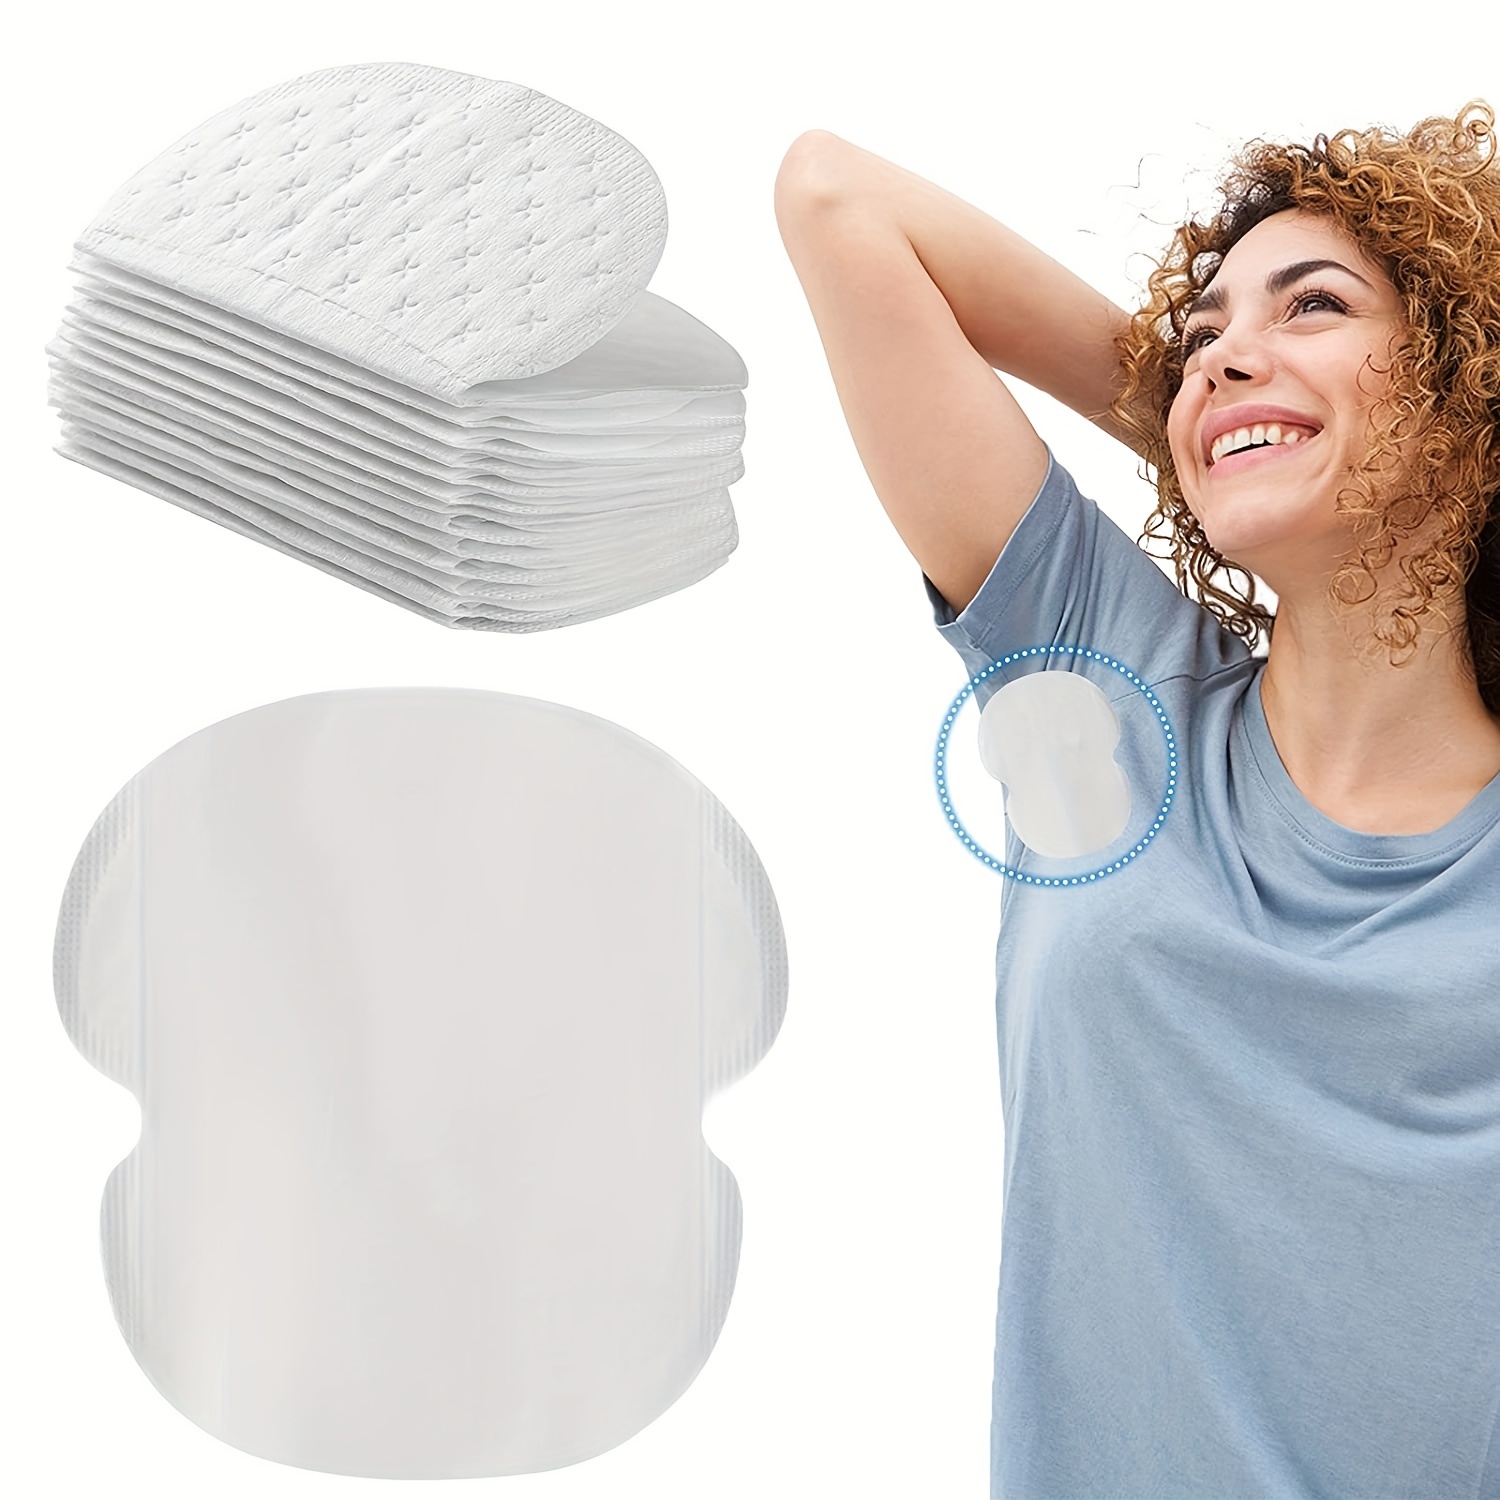 100pcs Armpits Sweat Pads For Underarm Sweat Absorbing Pads For